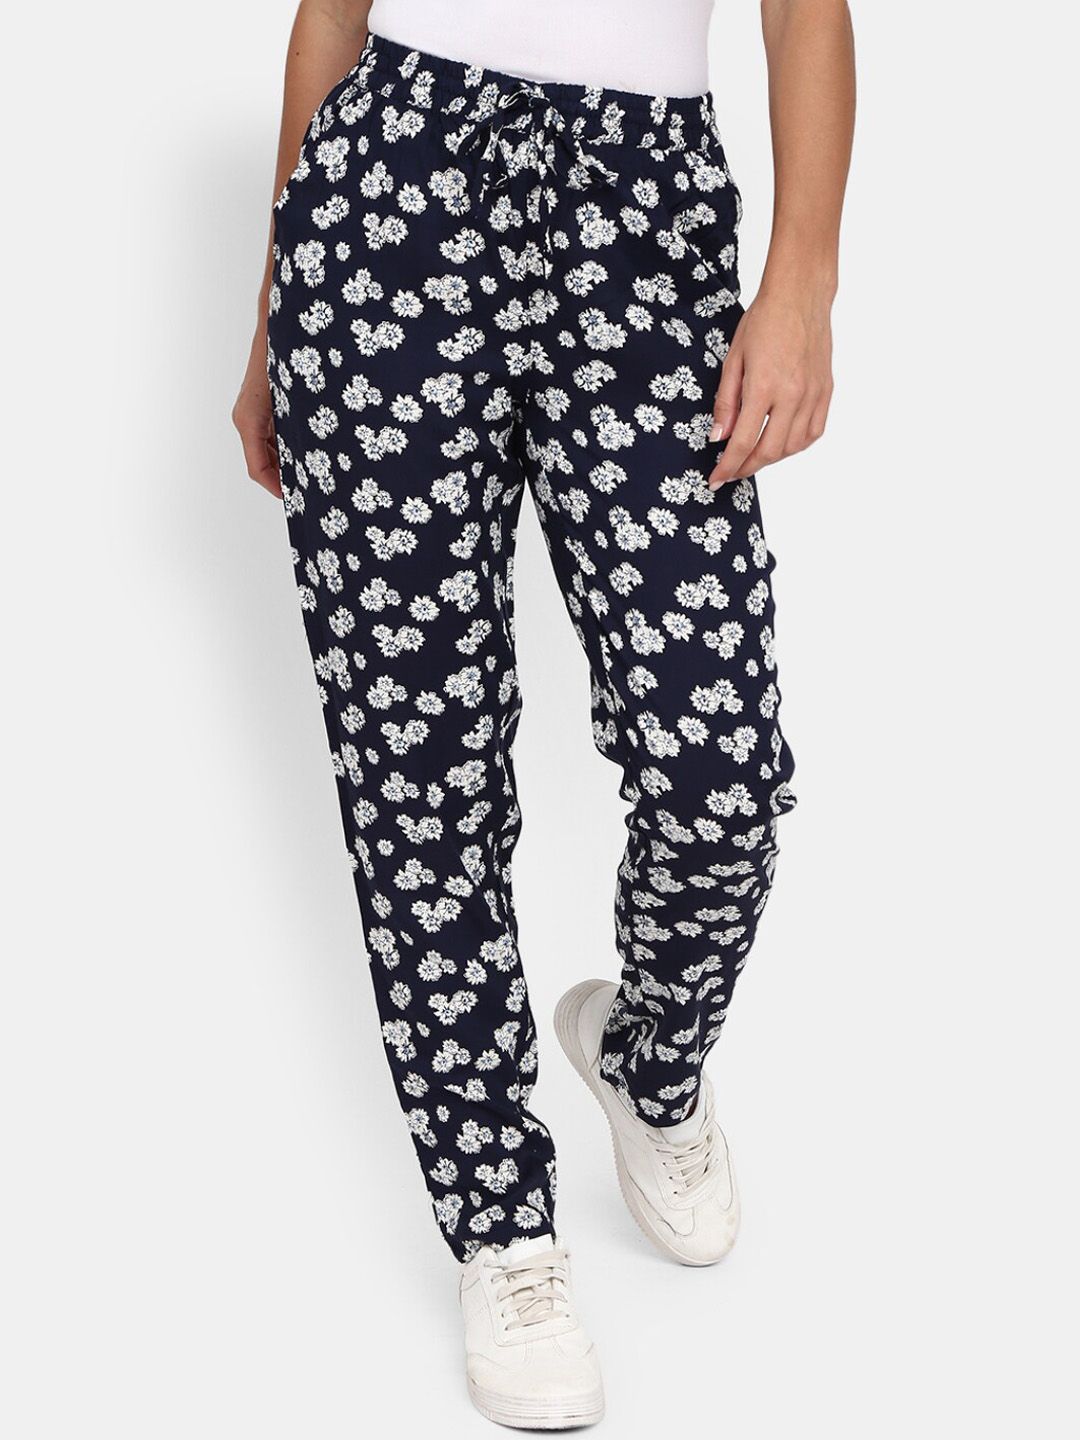 V-Mart Navy Blue Floral Printed Lounge Pants Price in India